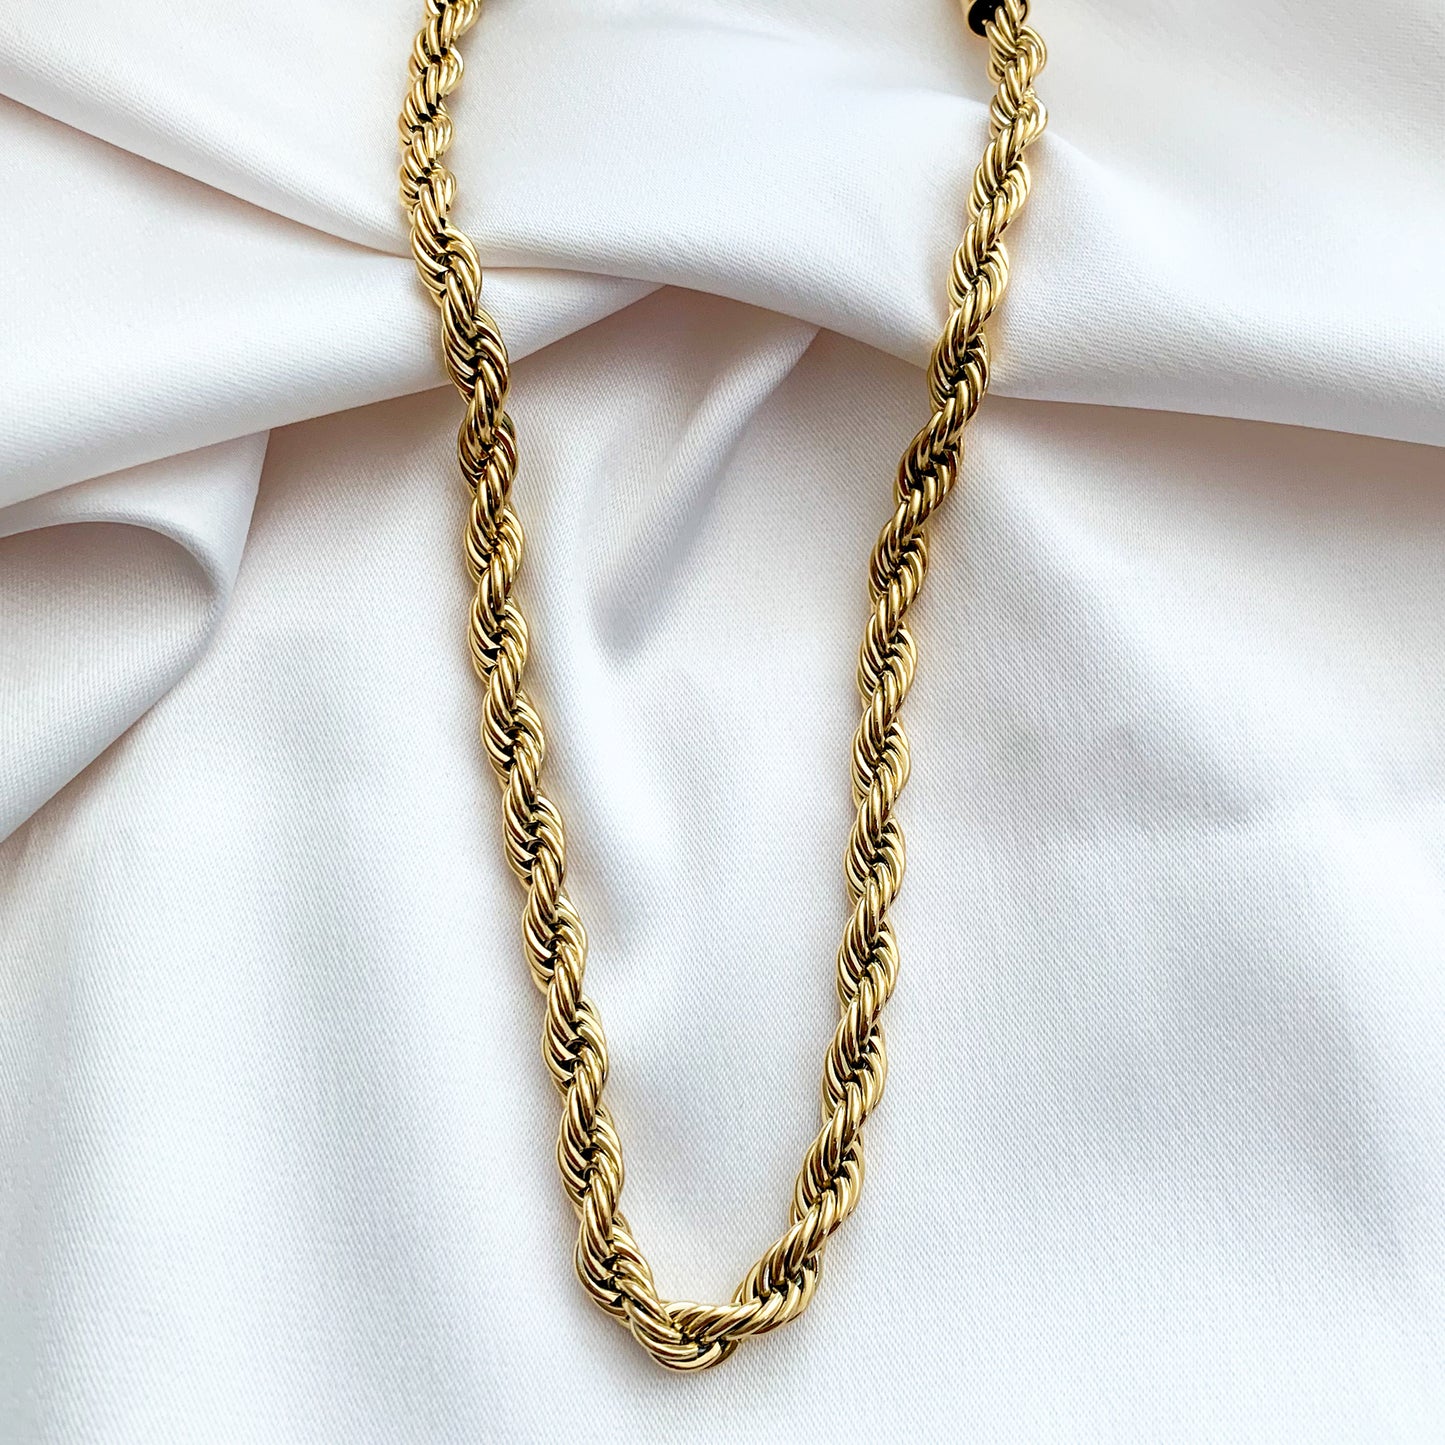 Alexandra Marks Jewelry - Gold twisted rope chain choker necklace